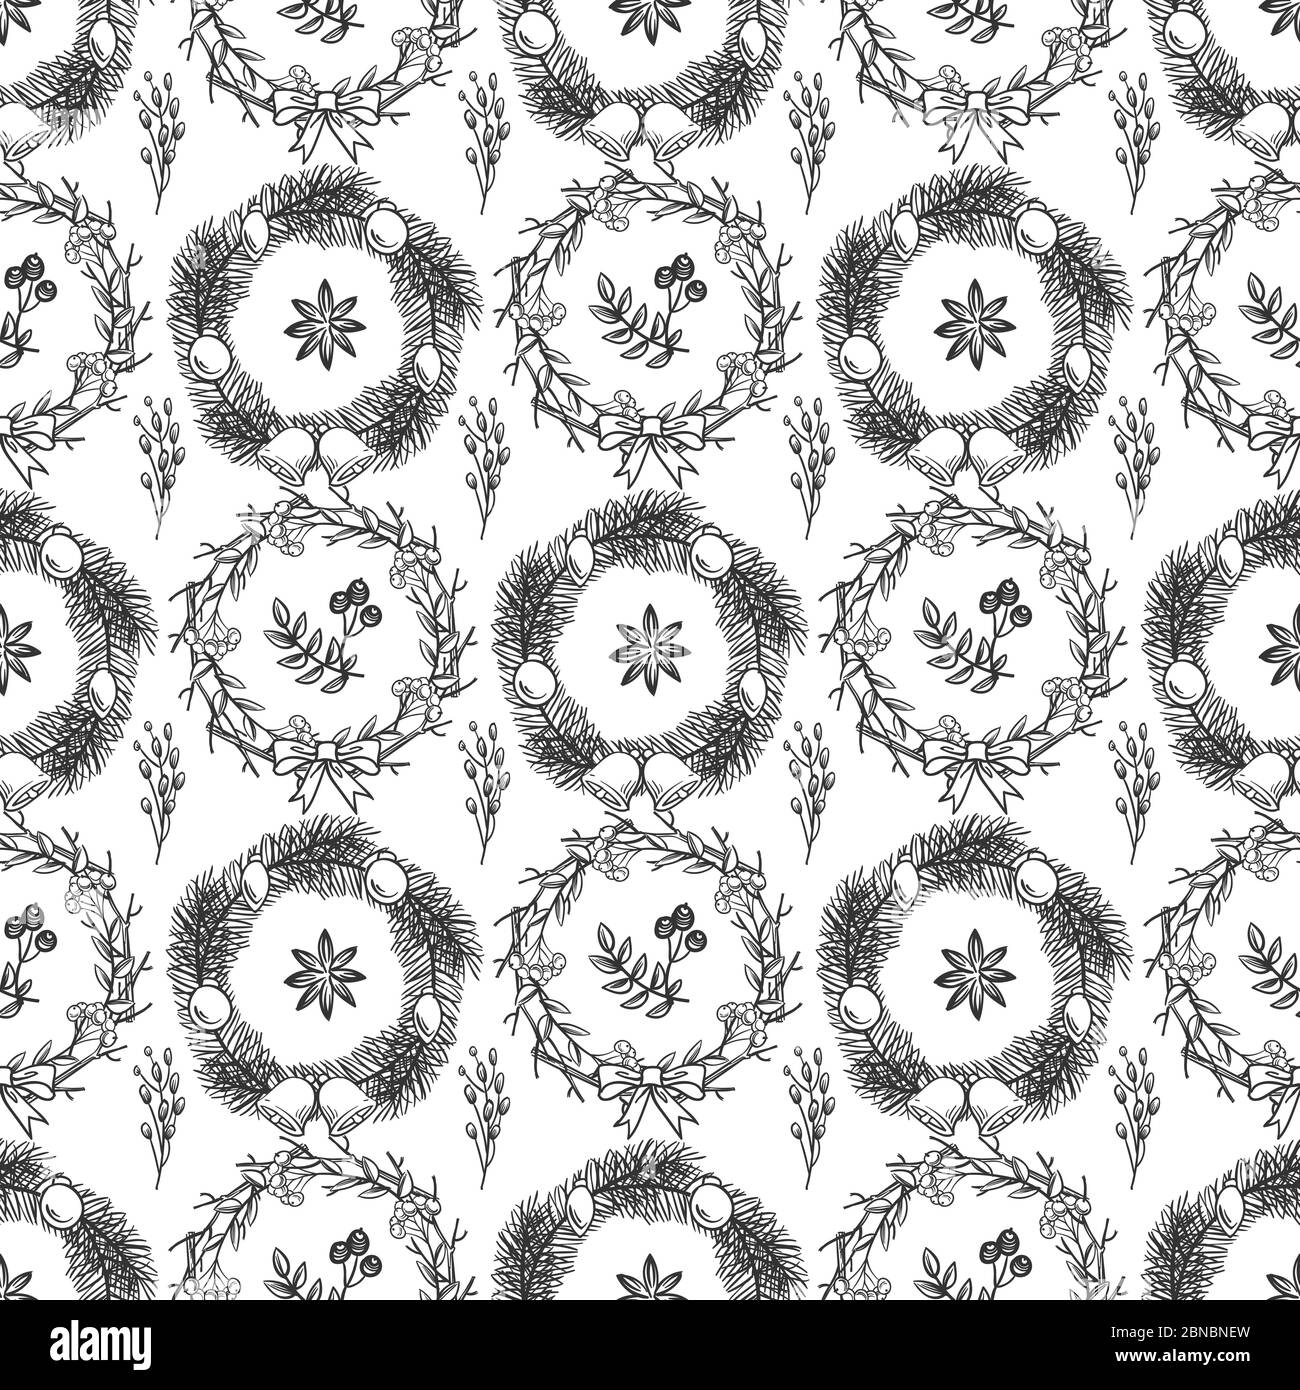 Hand drawn Christmas decorations seamless pattern background vector illustration design Stock Vector